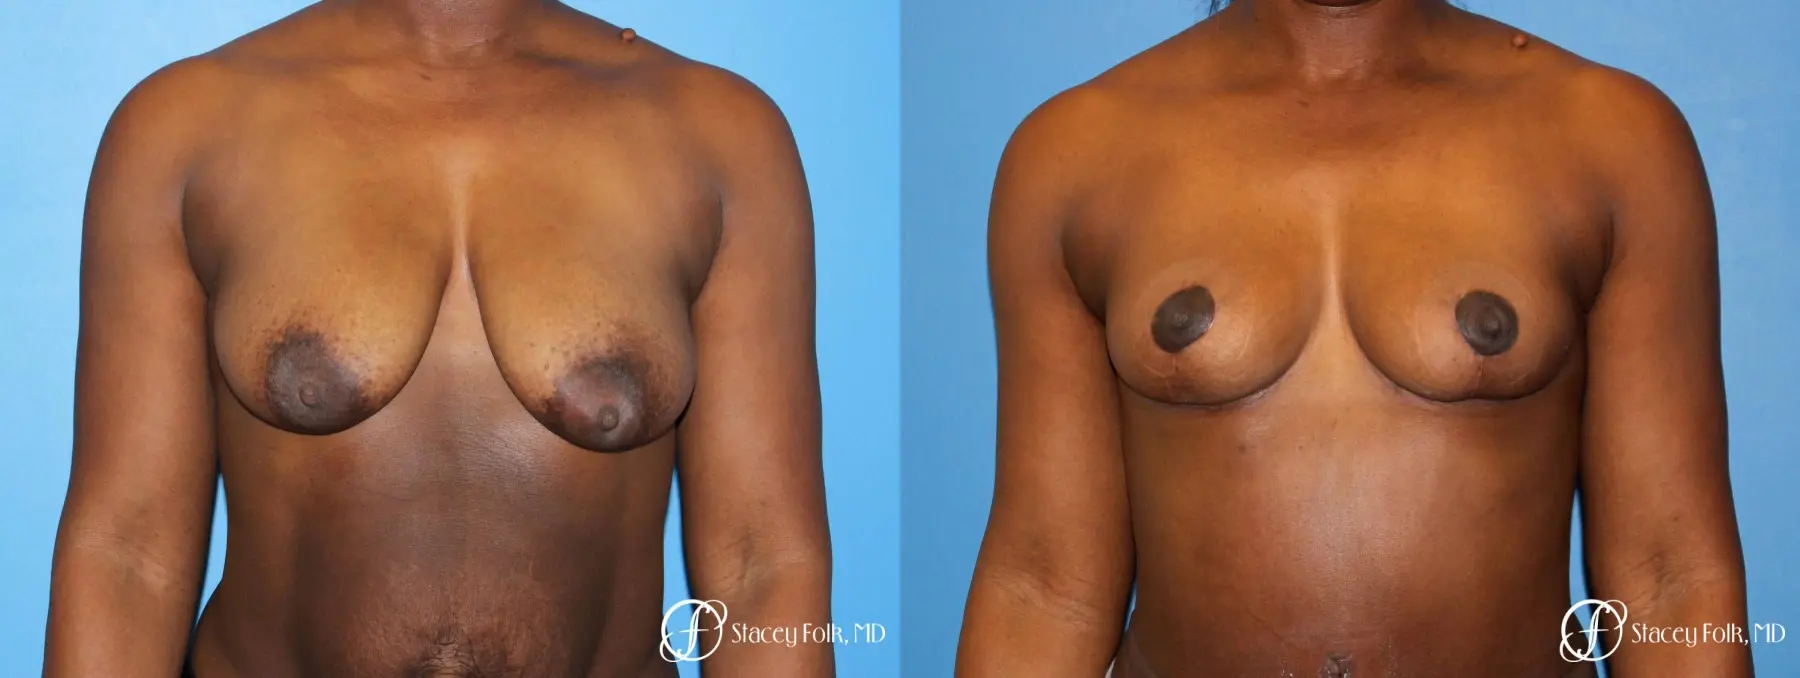 Denver Breast Lift - Mastopexy 7172 - Before and After